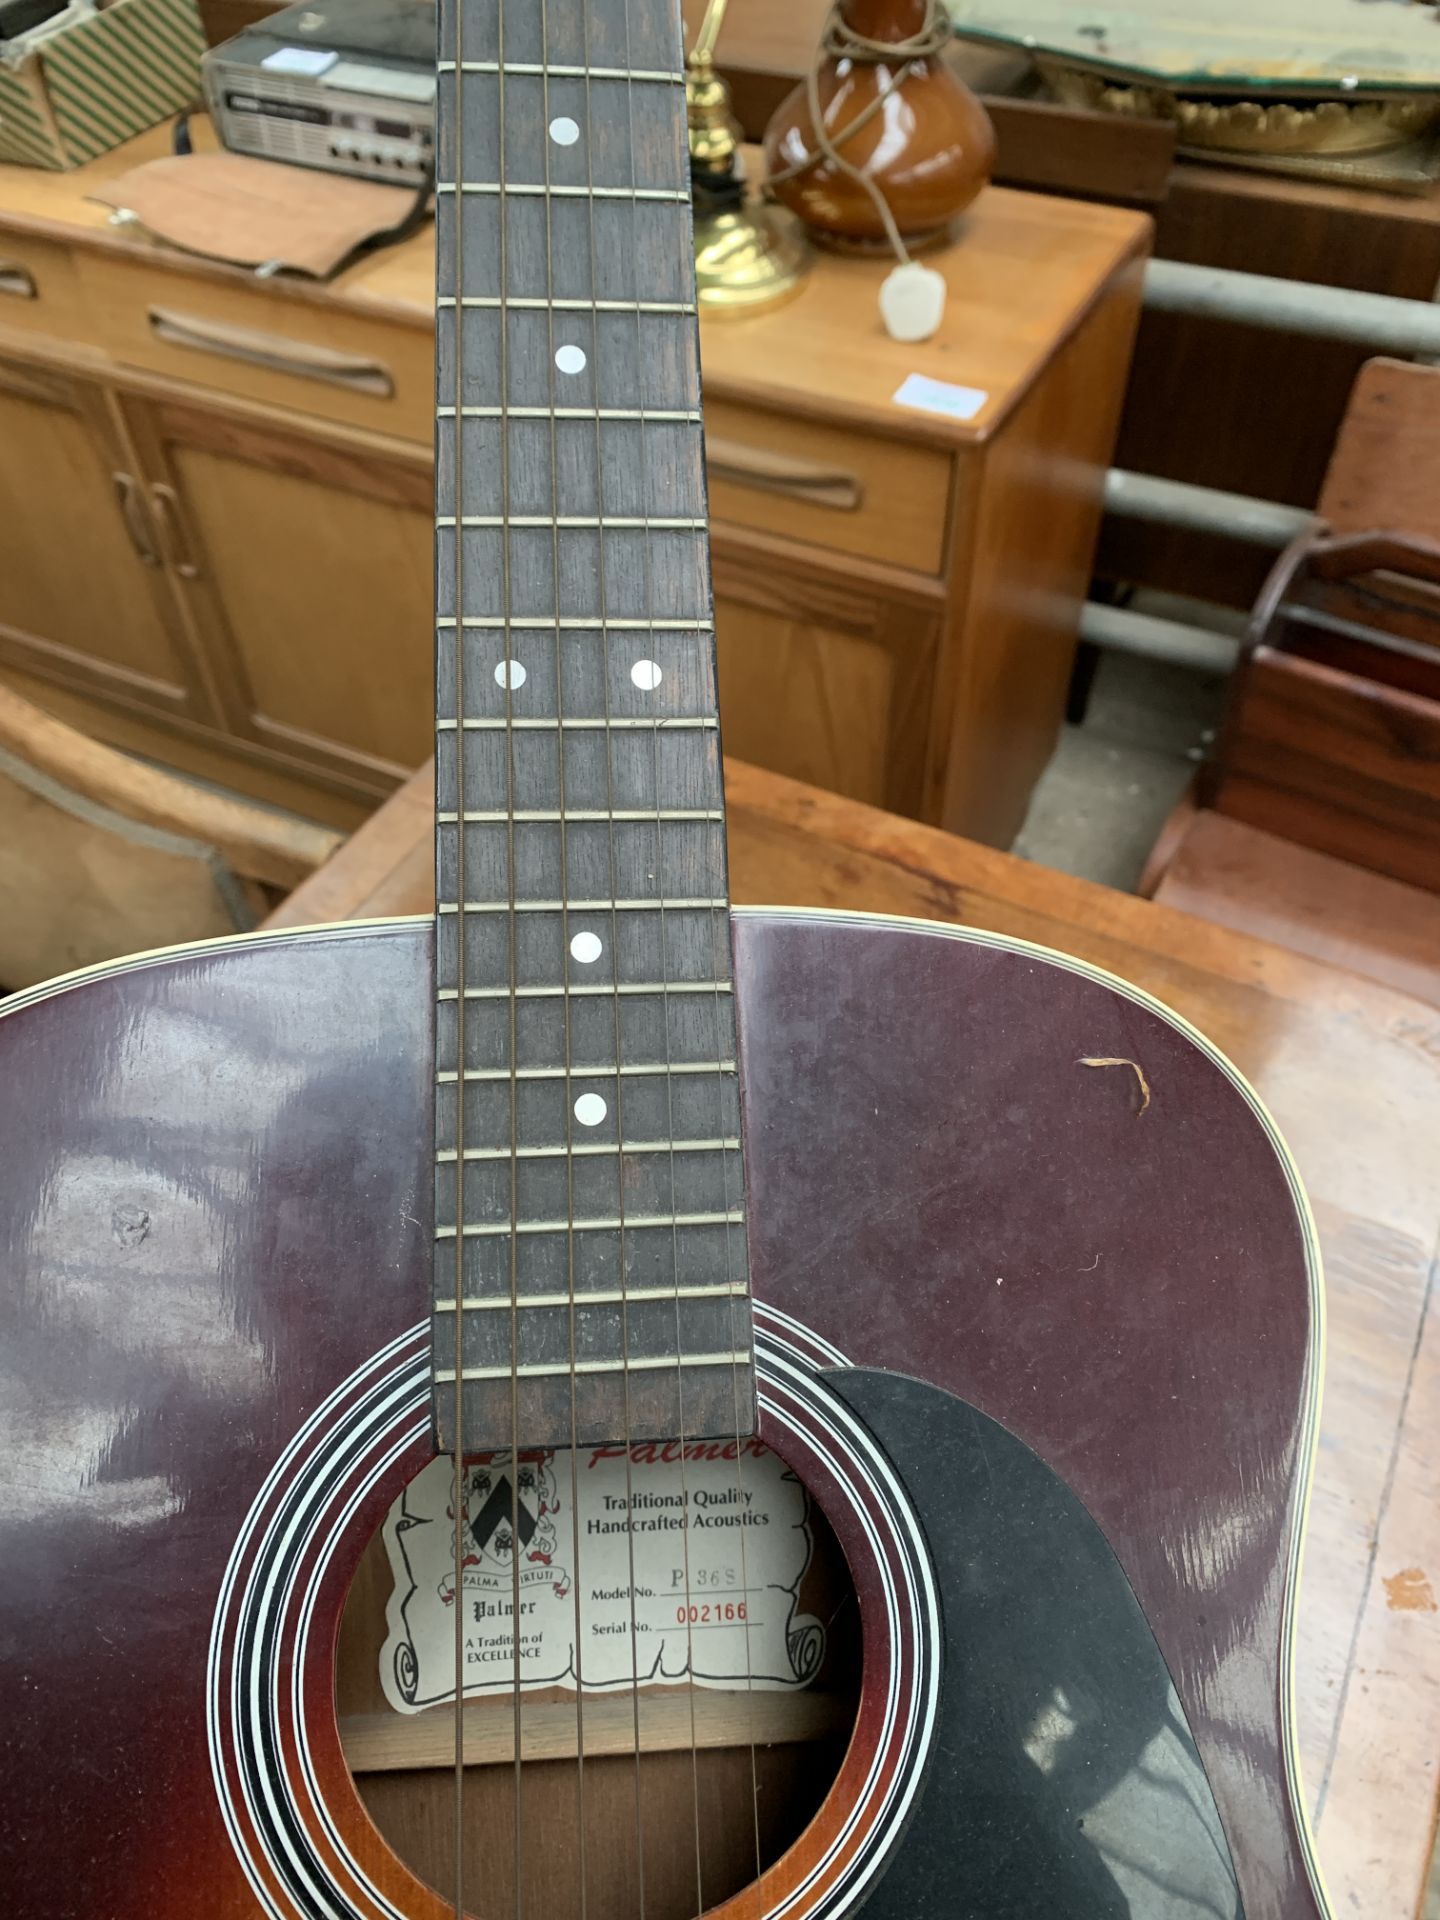 Palmer P36S acoustic guitar - Image 3 of 3